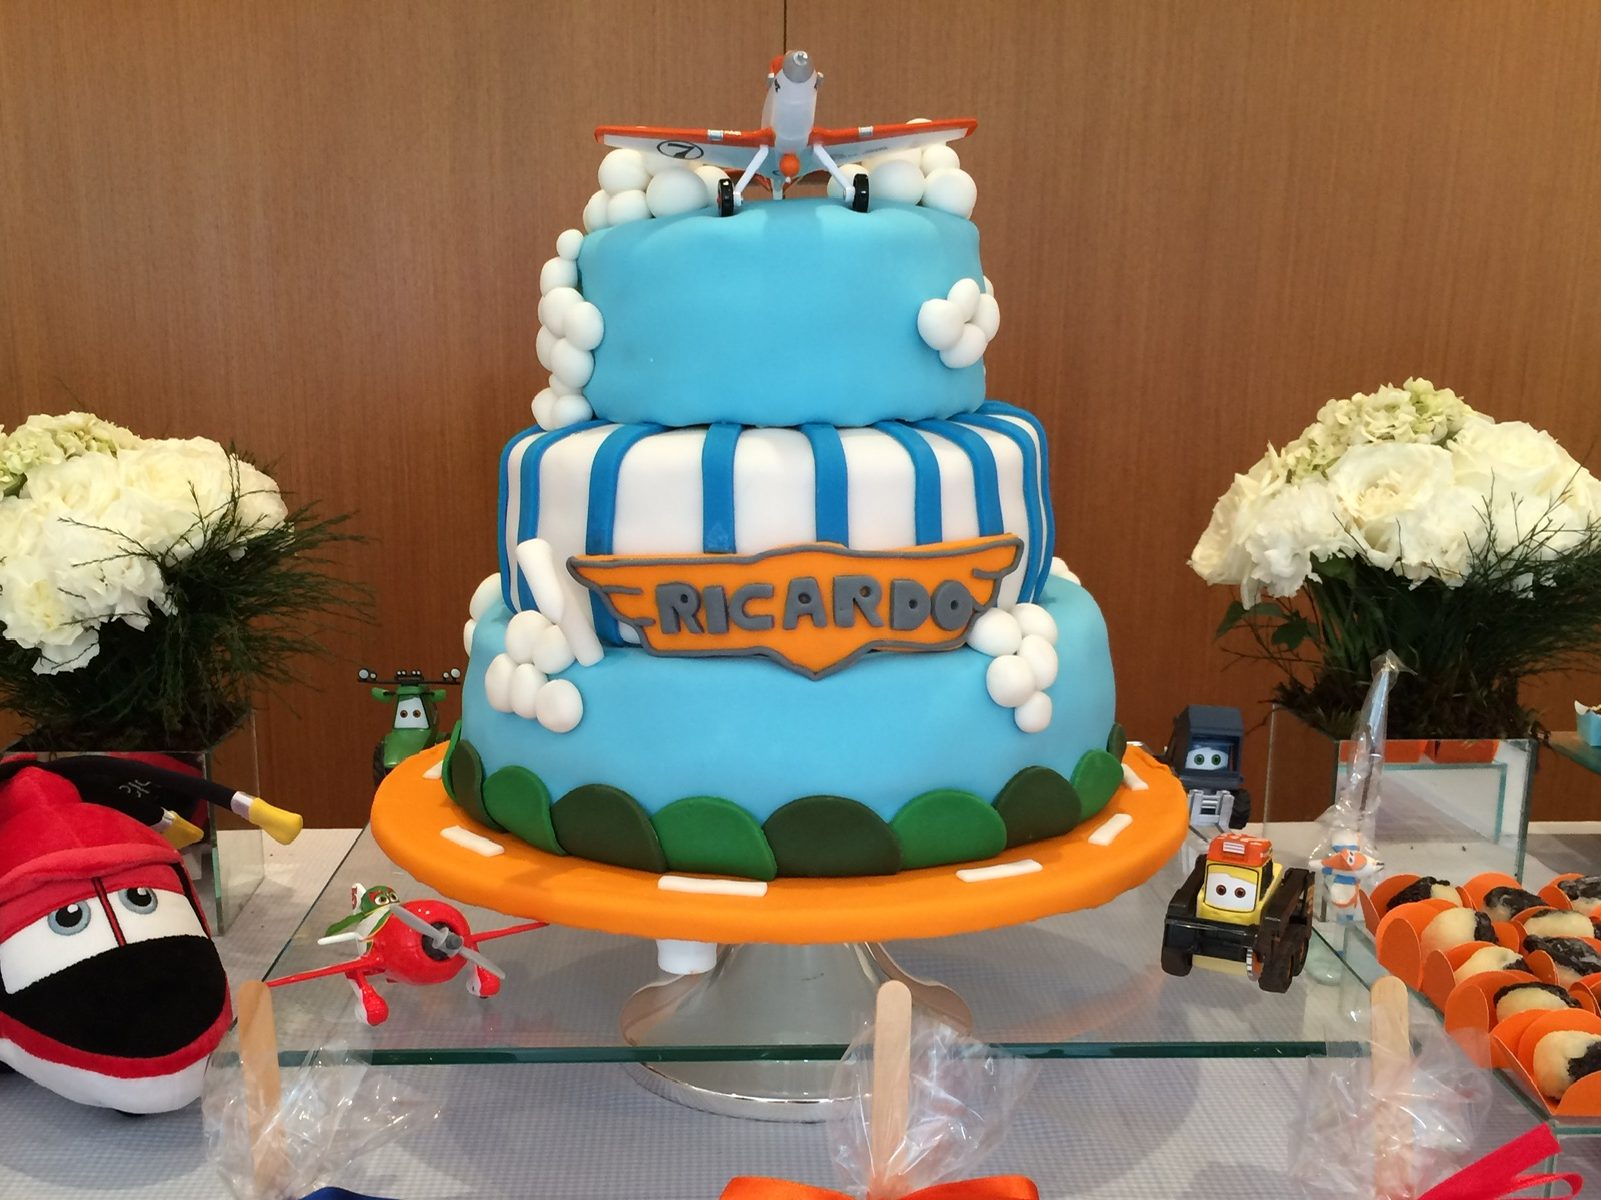 Cake in Planes Party Theme by Ideas for Family